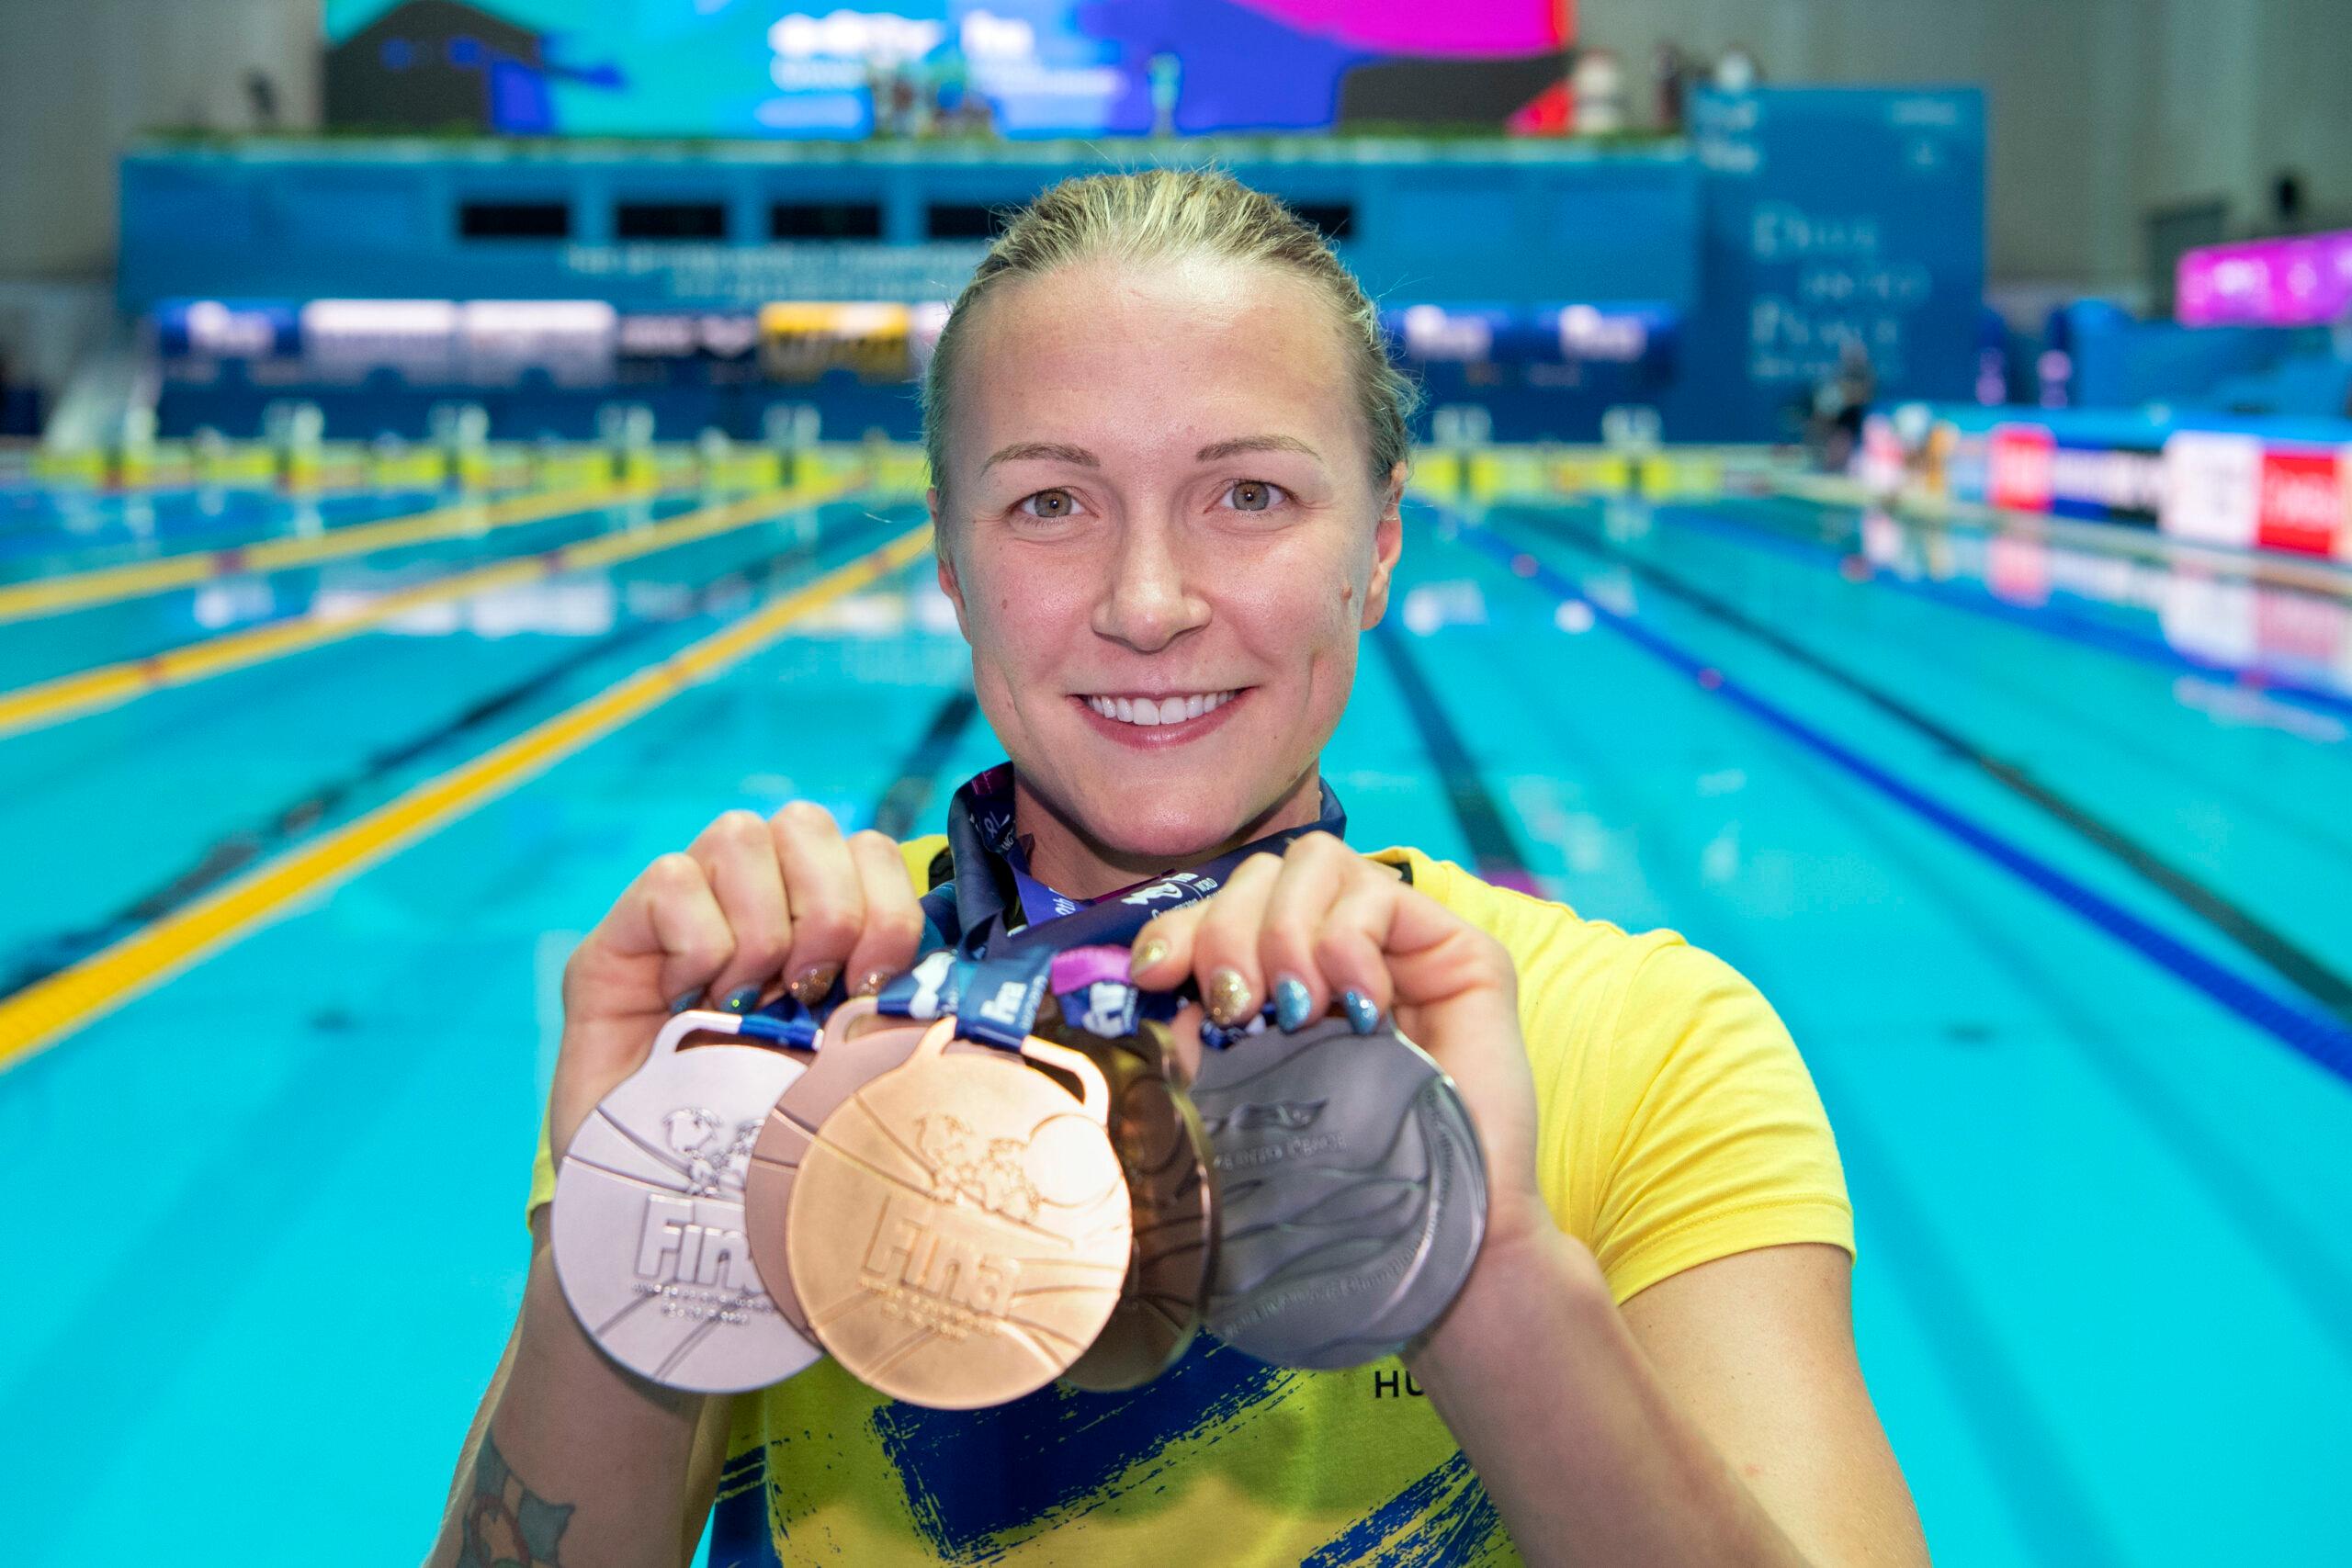 Smiling Swedish sports star Sarah Sjöström holding upp three medals in front of her, a pool in the background.